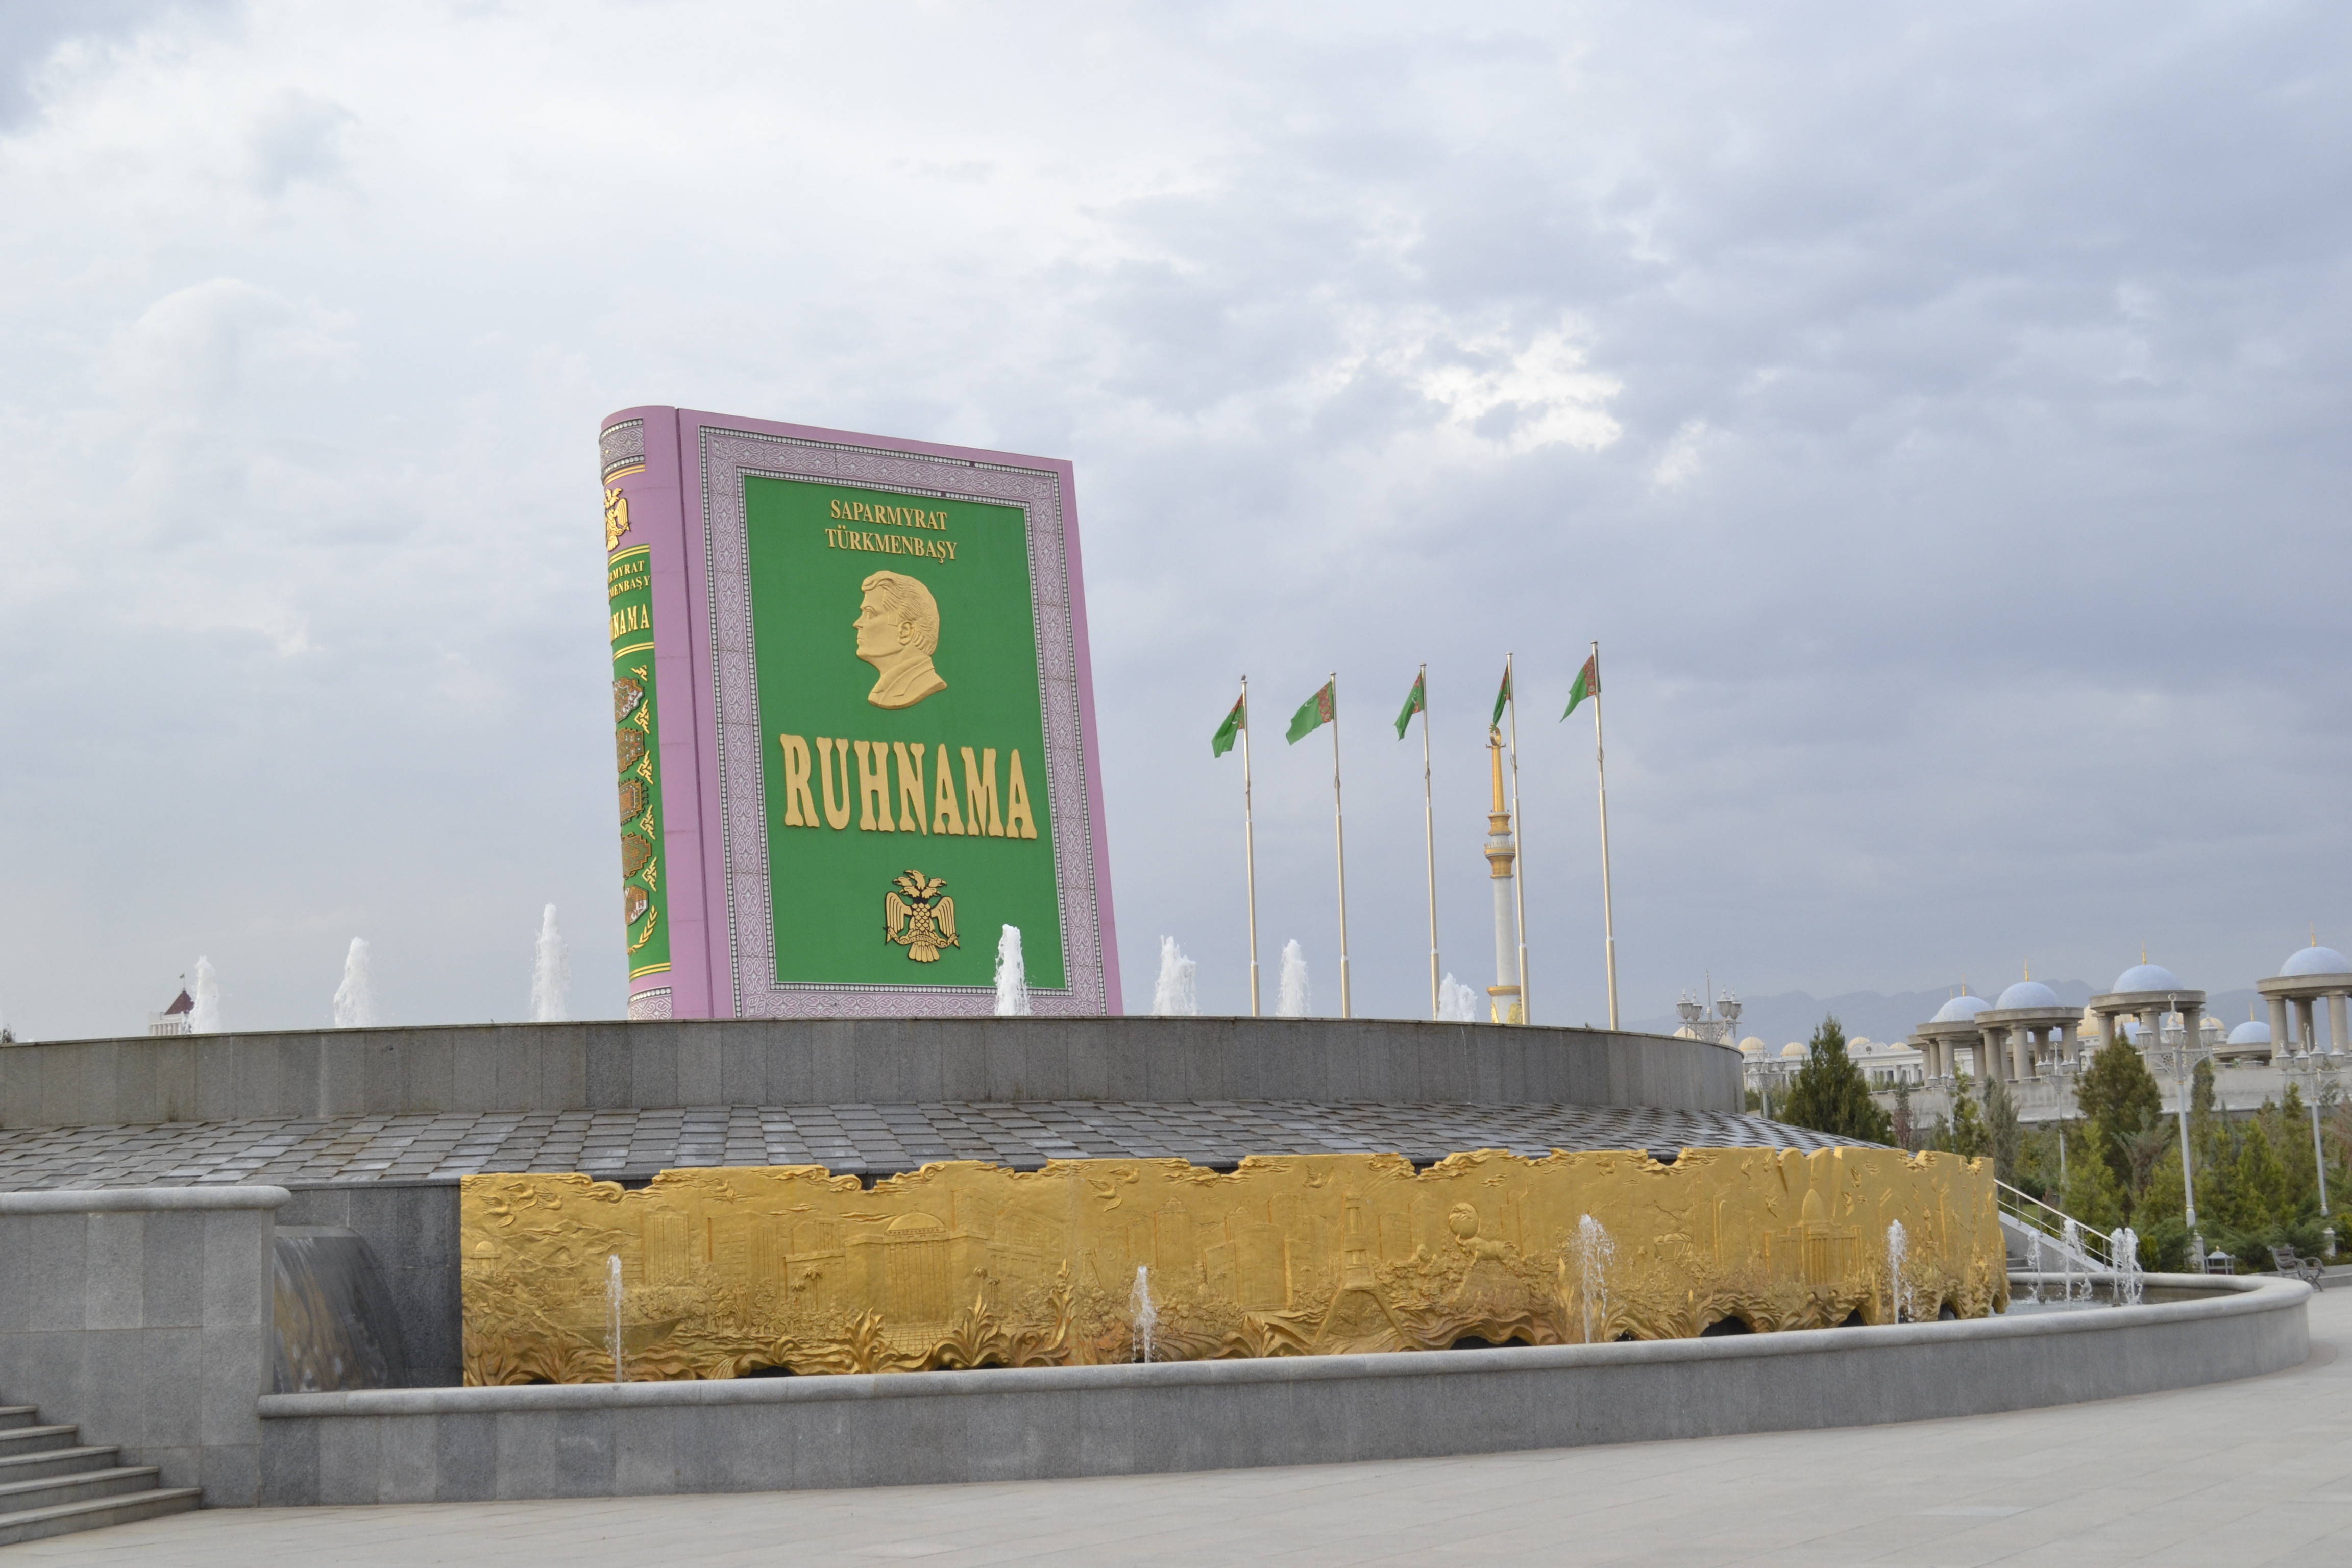 Monument to the great literary work, the Ruhnama, in Ashgabat